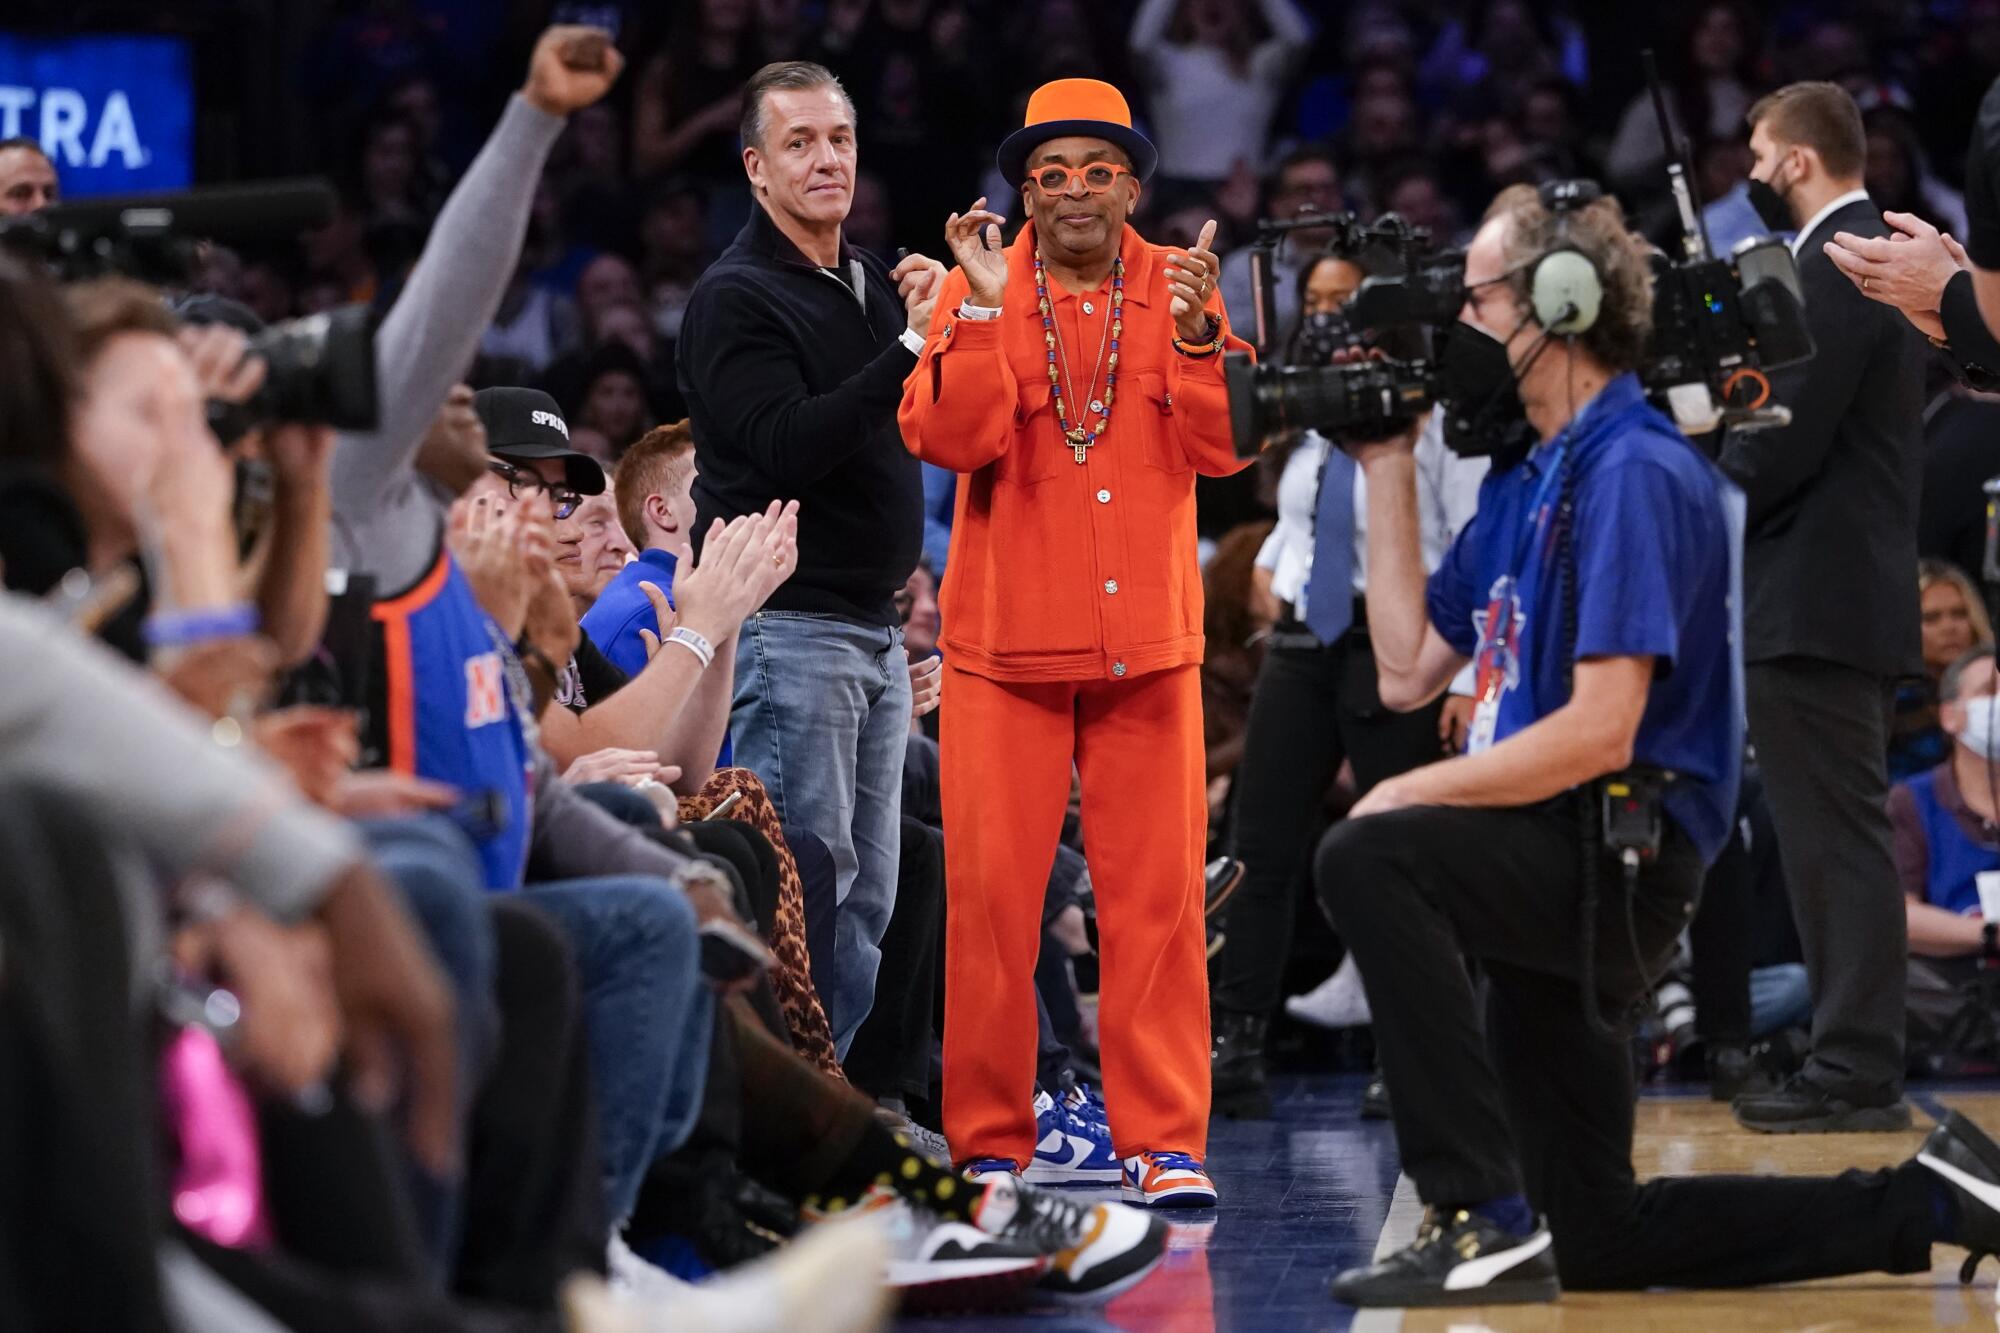 Film director Spike Lee, center, claps during a timeout in the first half of Tuesday's game